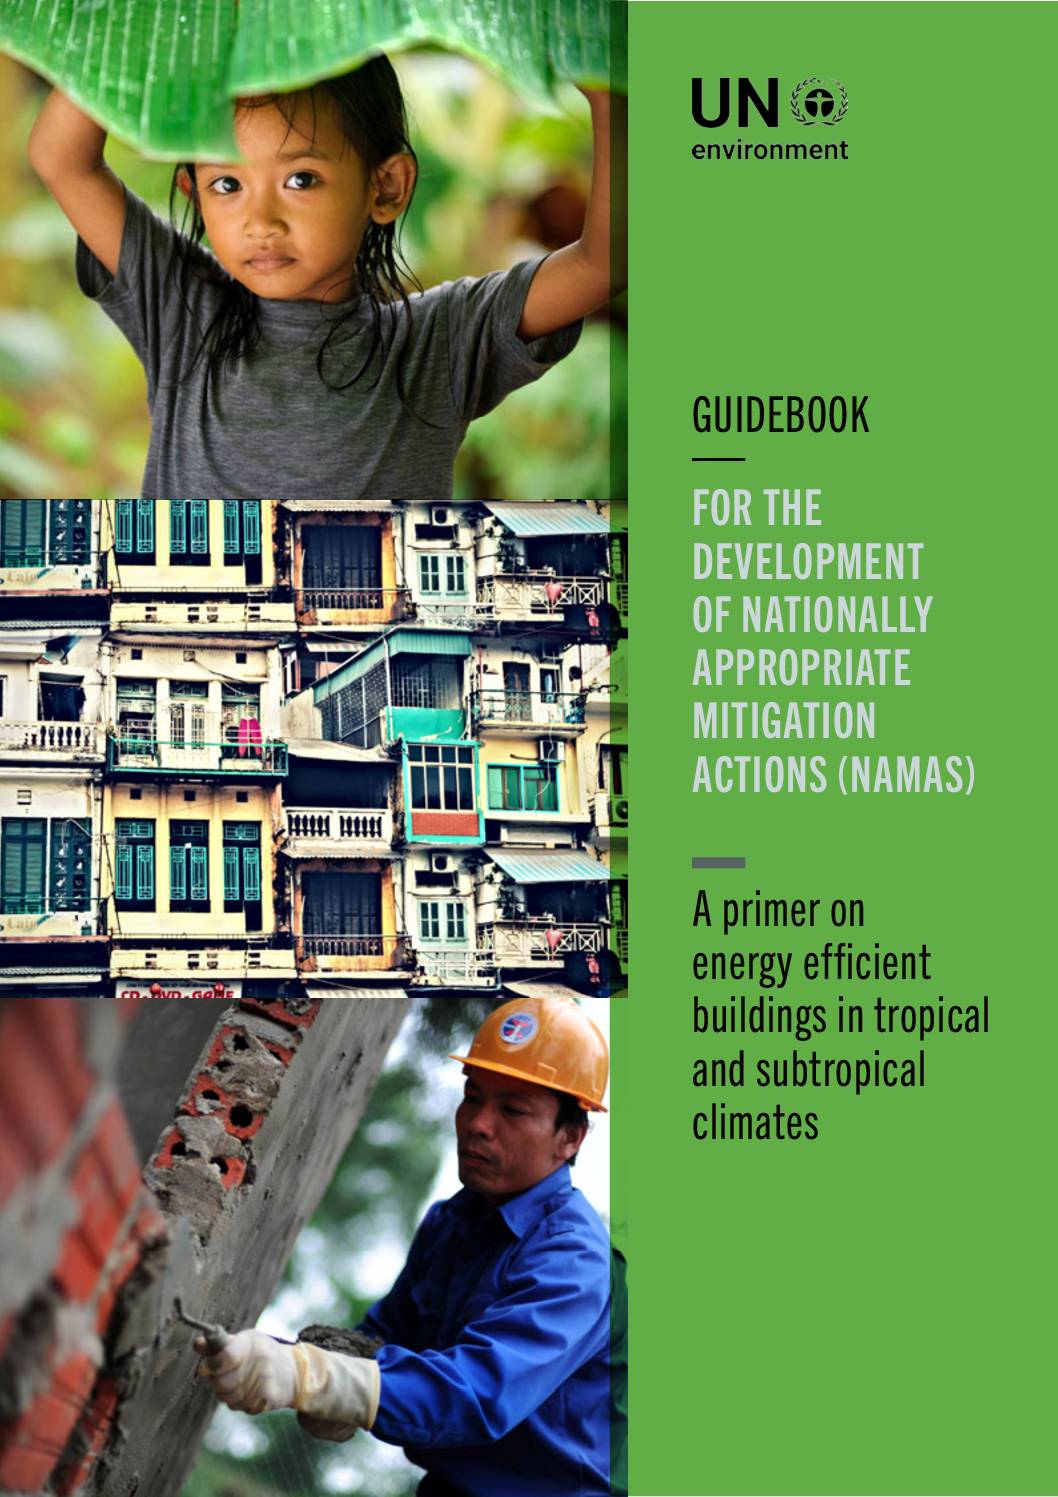 A primer on energy efficient buildings in tropical and subtropical climates